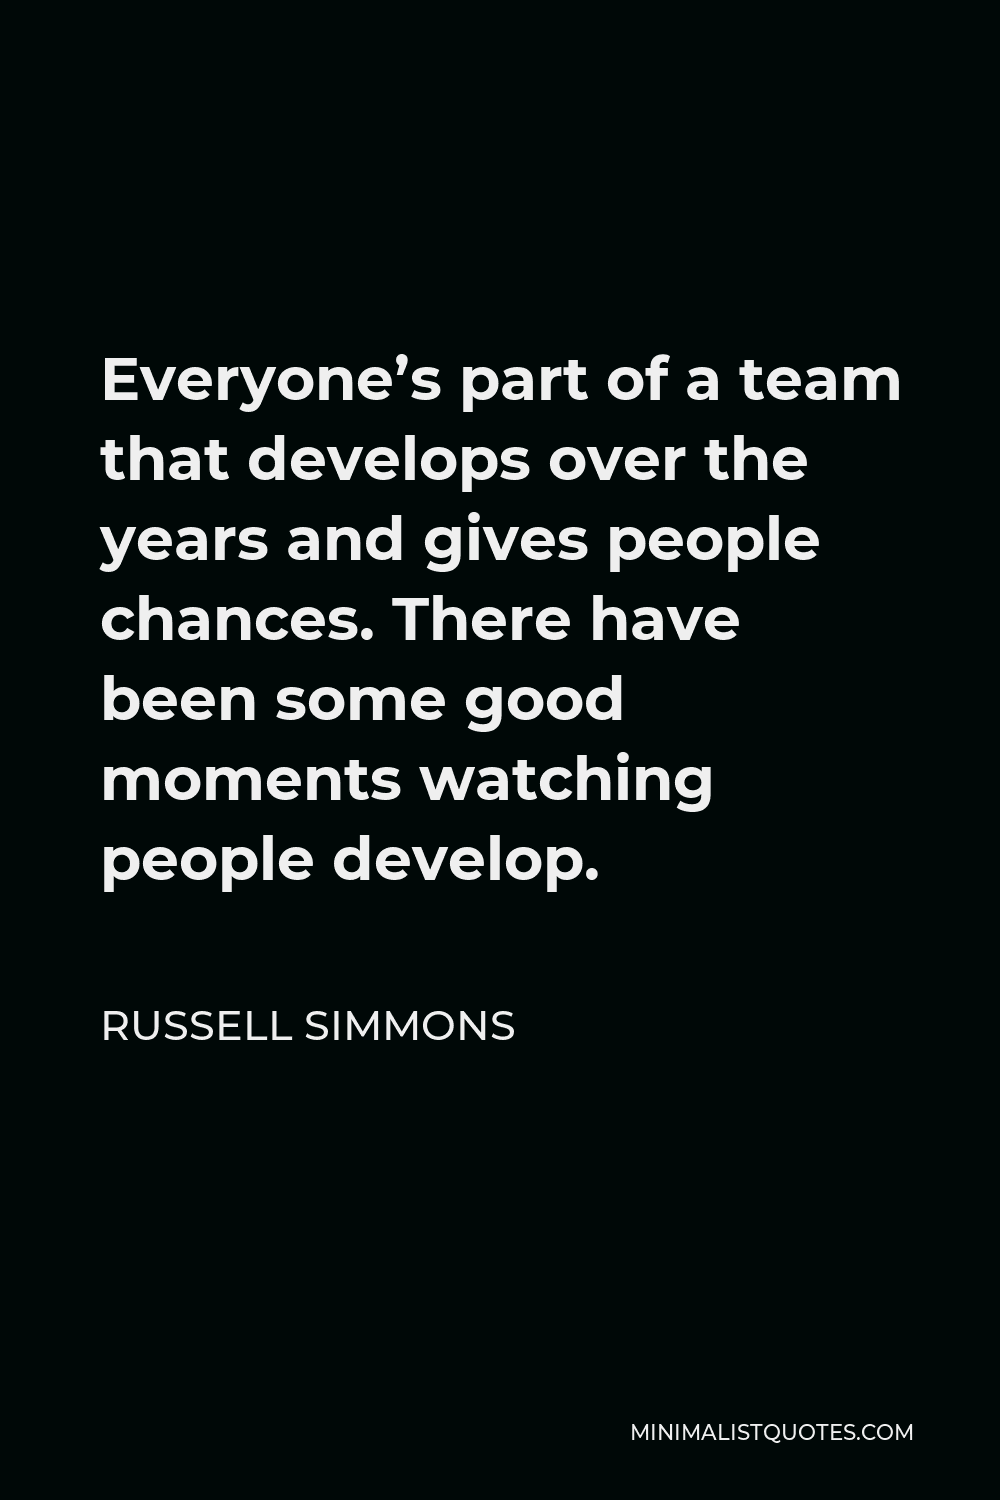 Russell Simmons Quote - Everyone’s part of a team that develops over the years and gives people chances. There have been some good moments watching people develop.